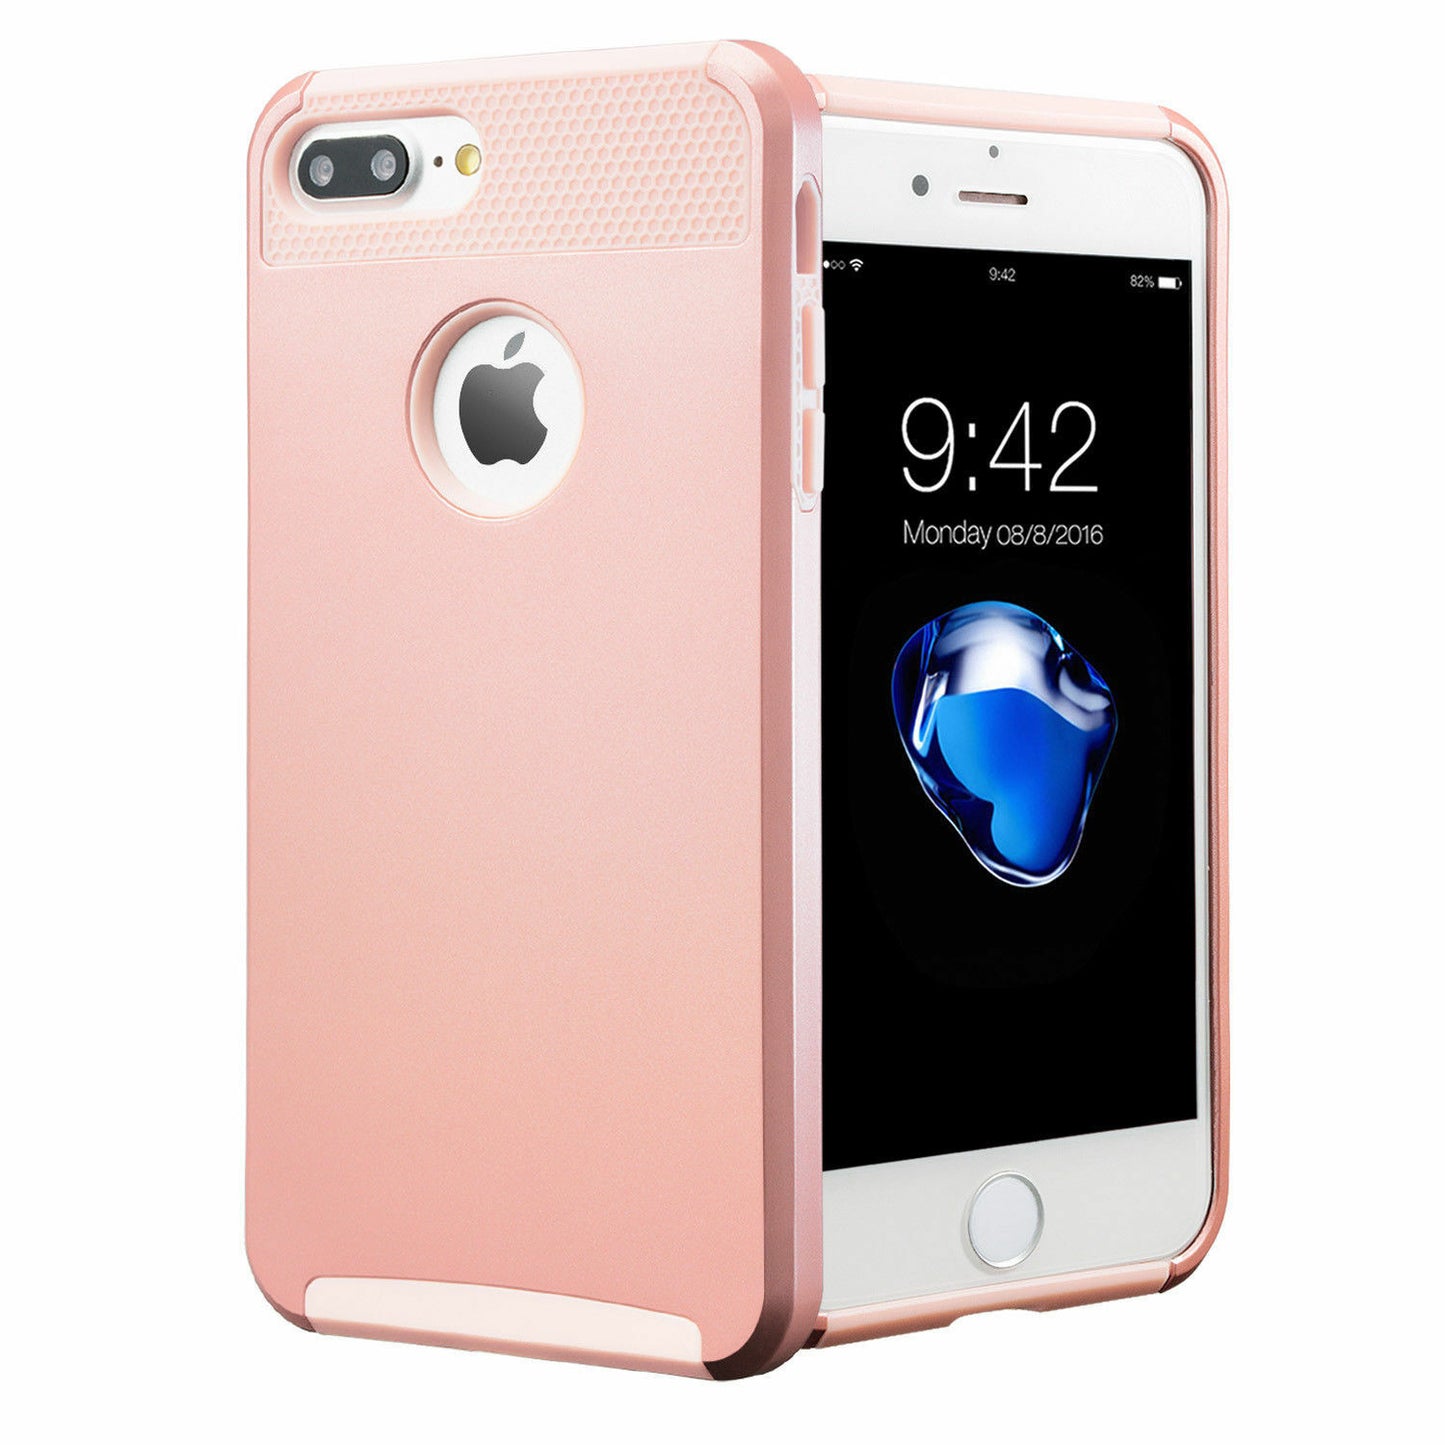 Hard Case Hybrid Heavy Duty Shockproof Rubber Cover for iPhone - carolay.co